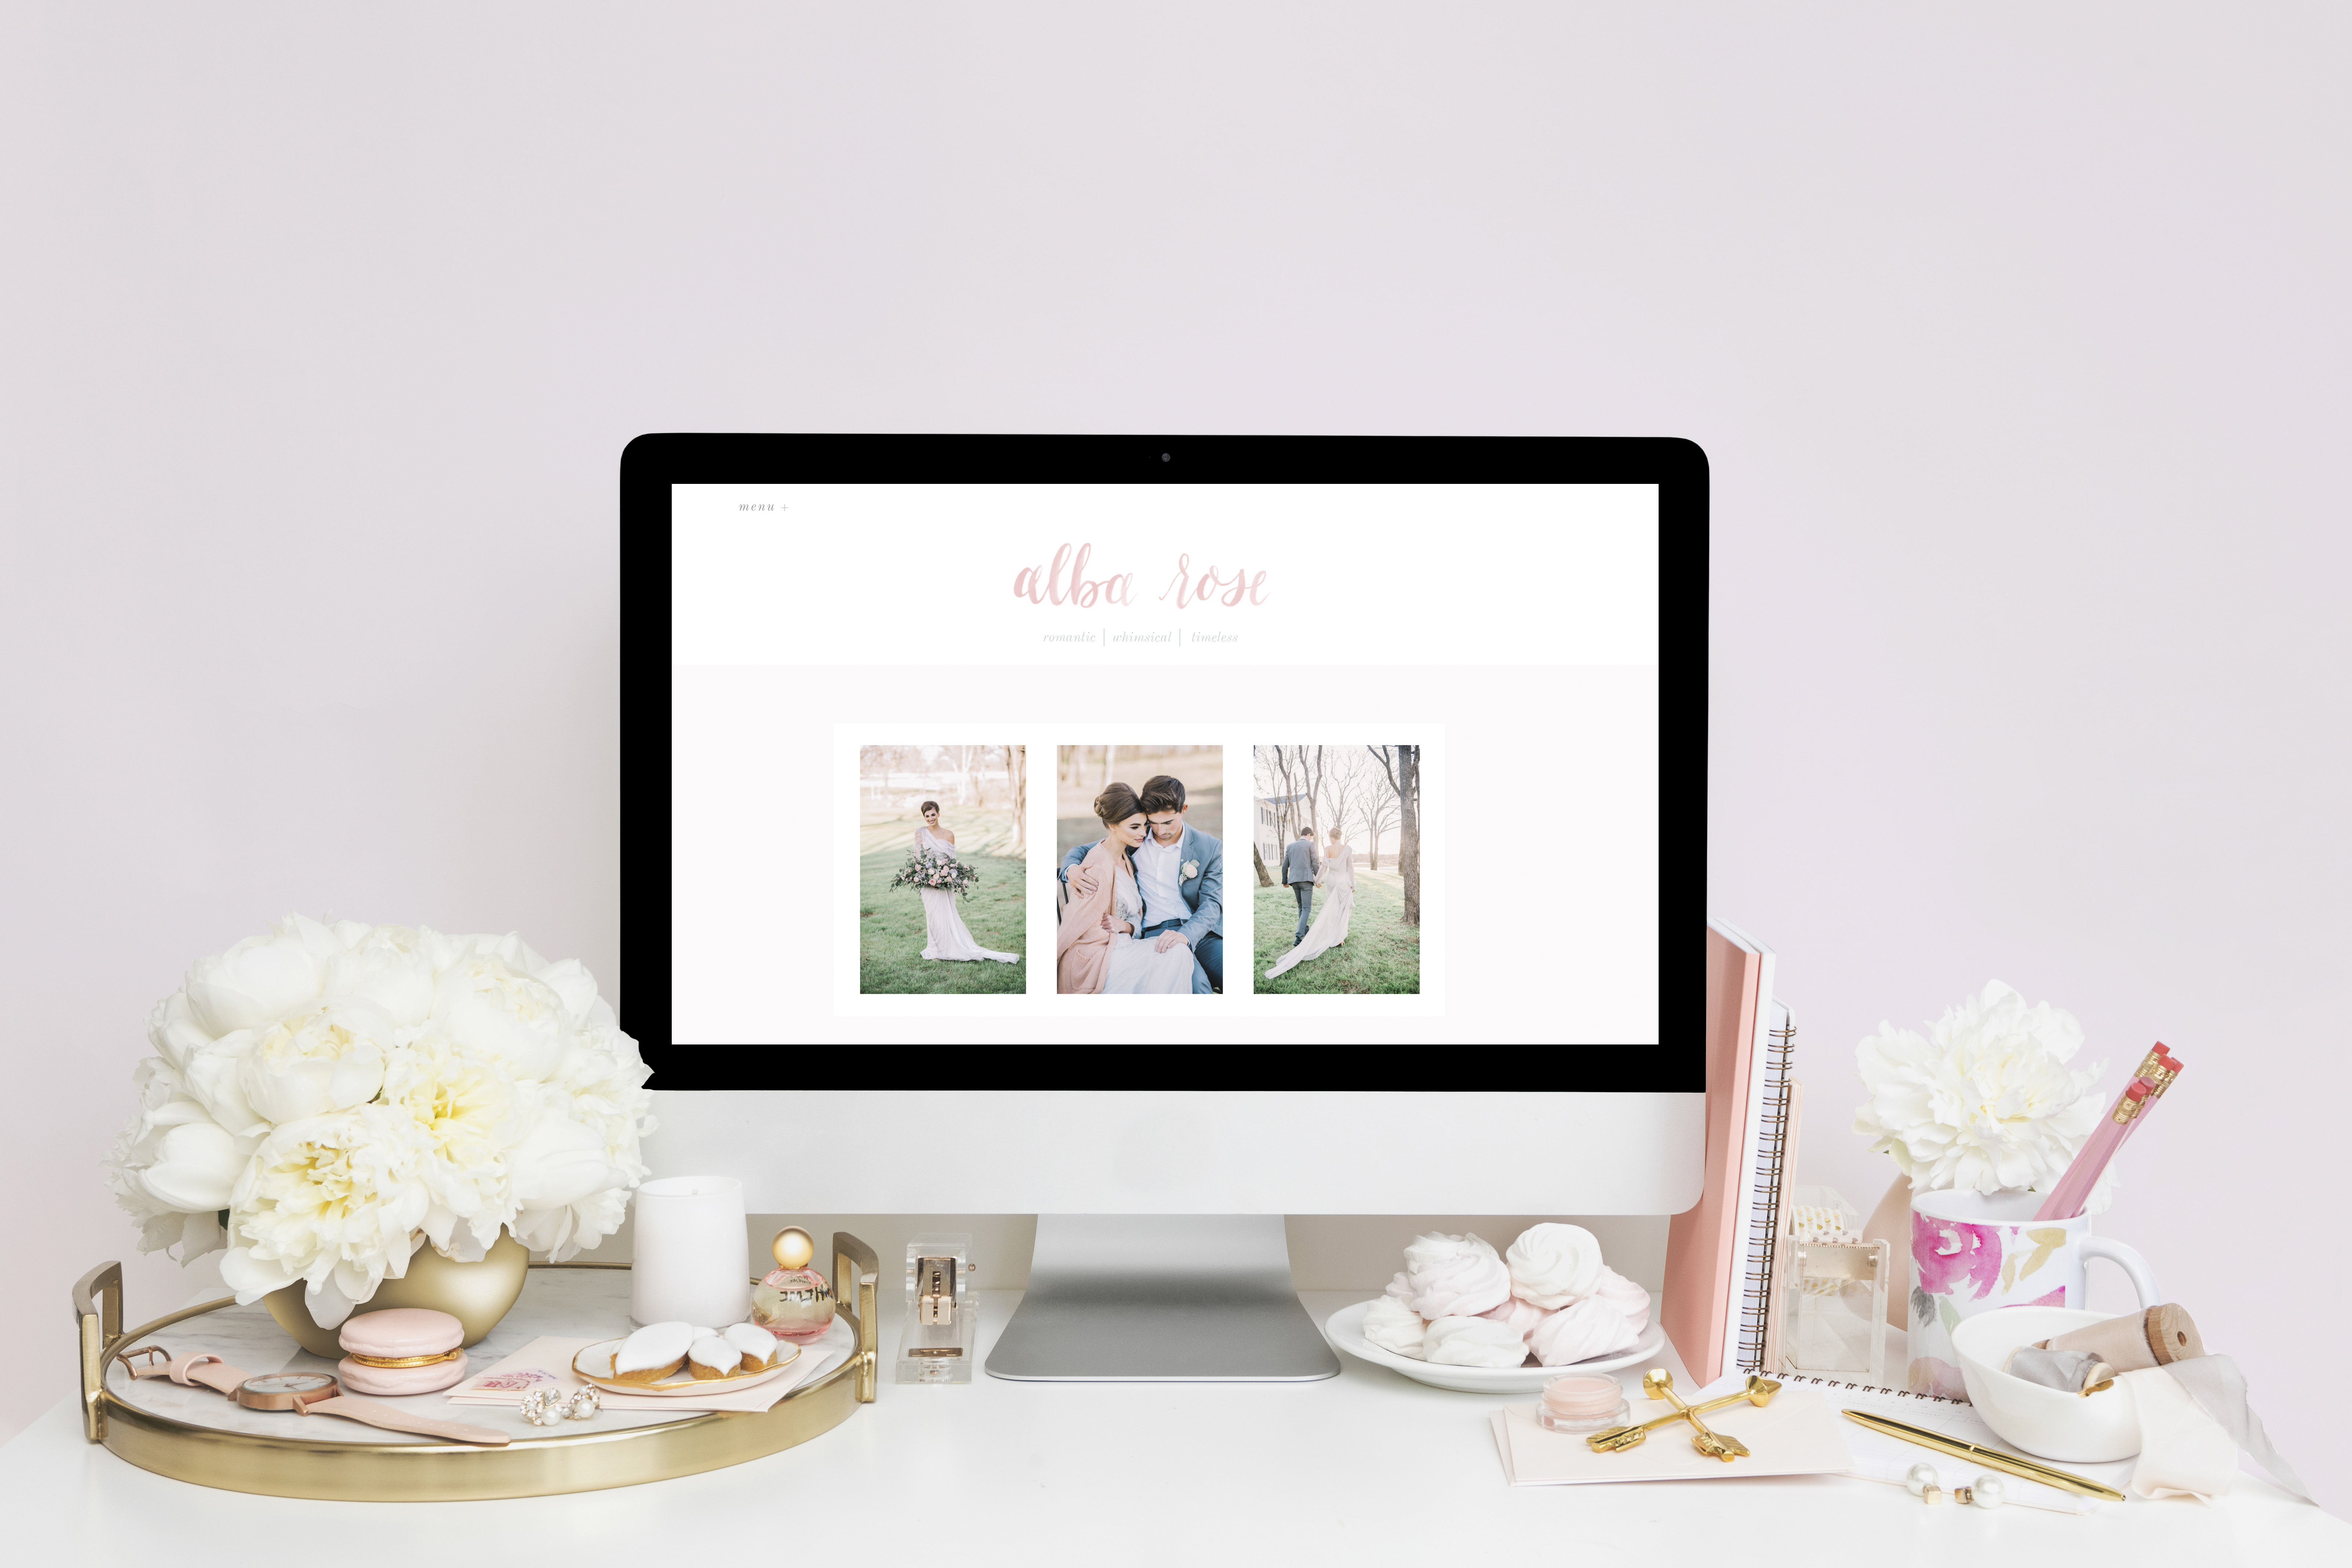 Alba Rose Photography New Website by Palm & Co.